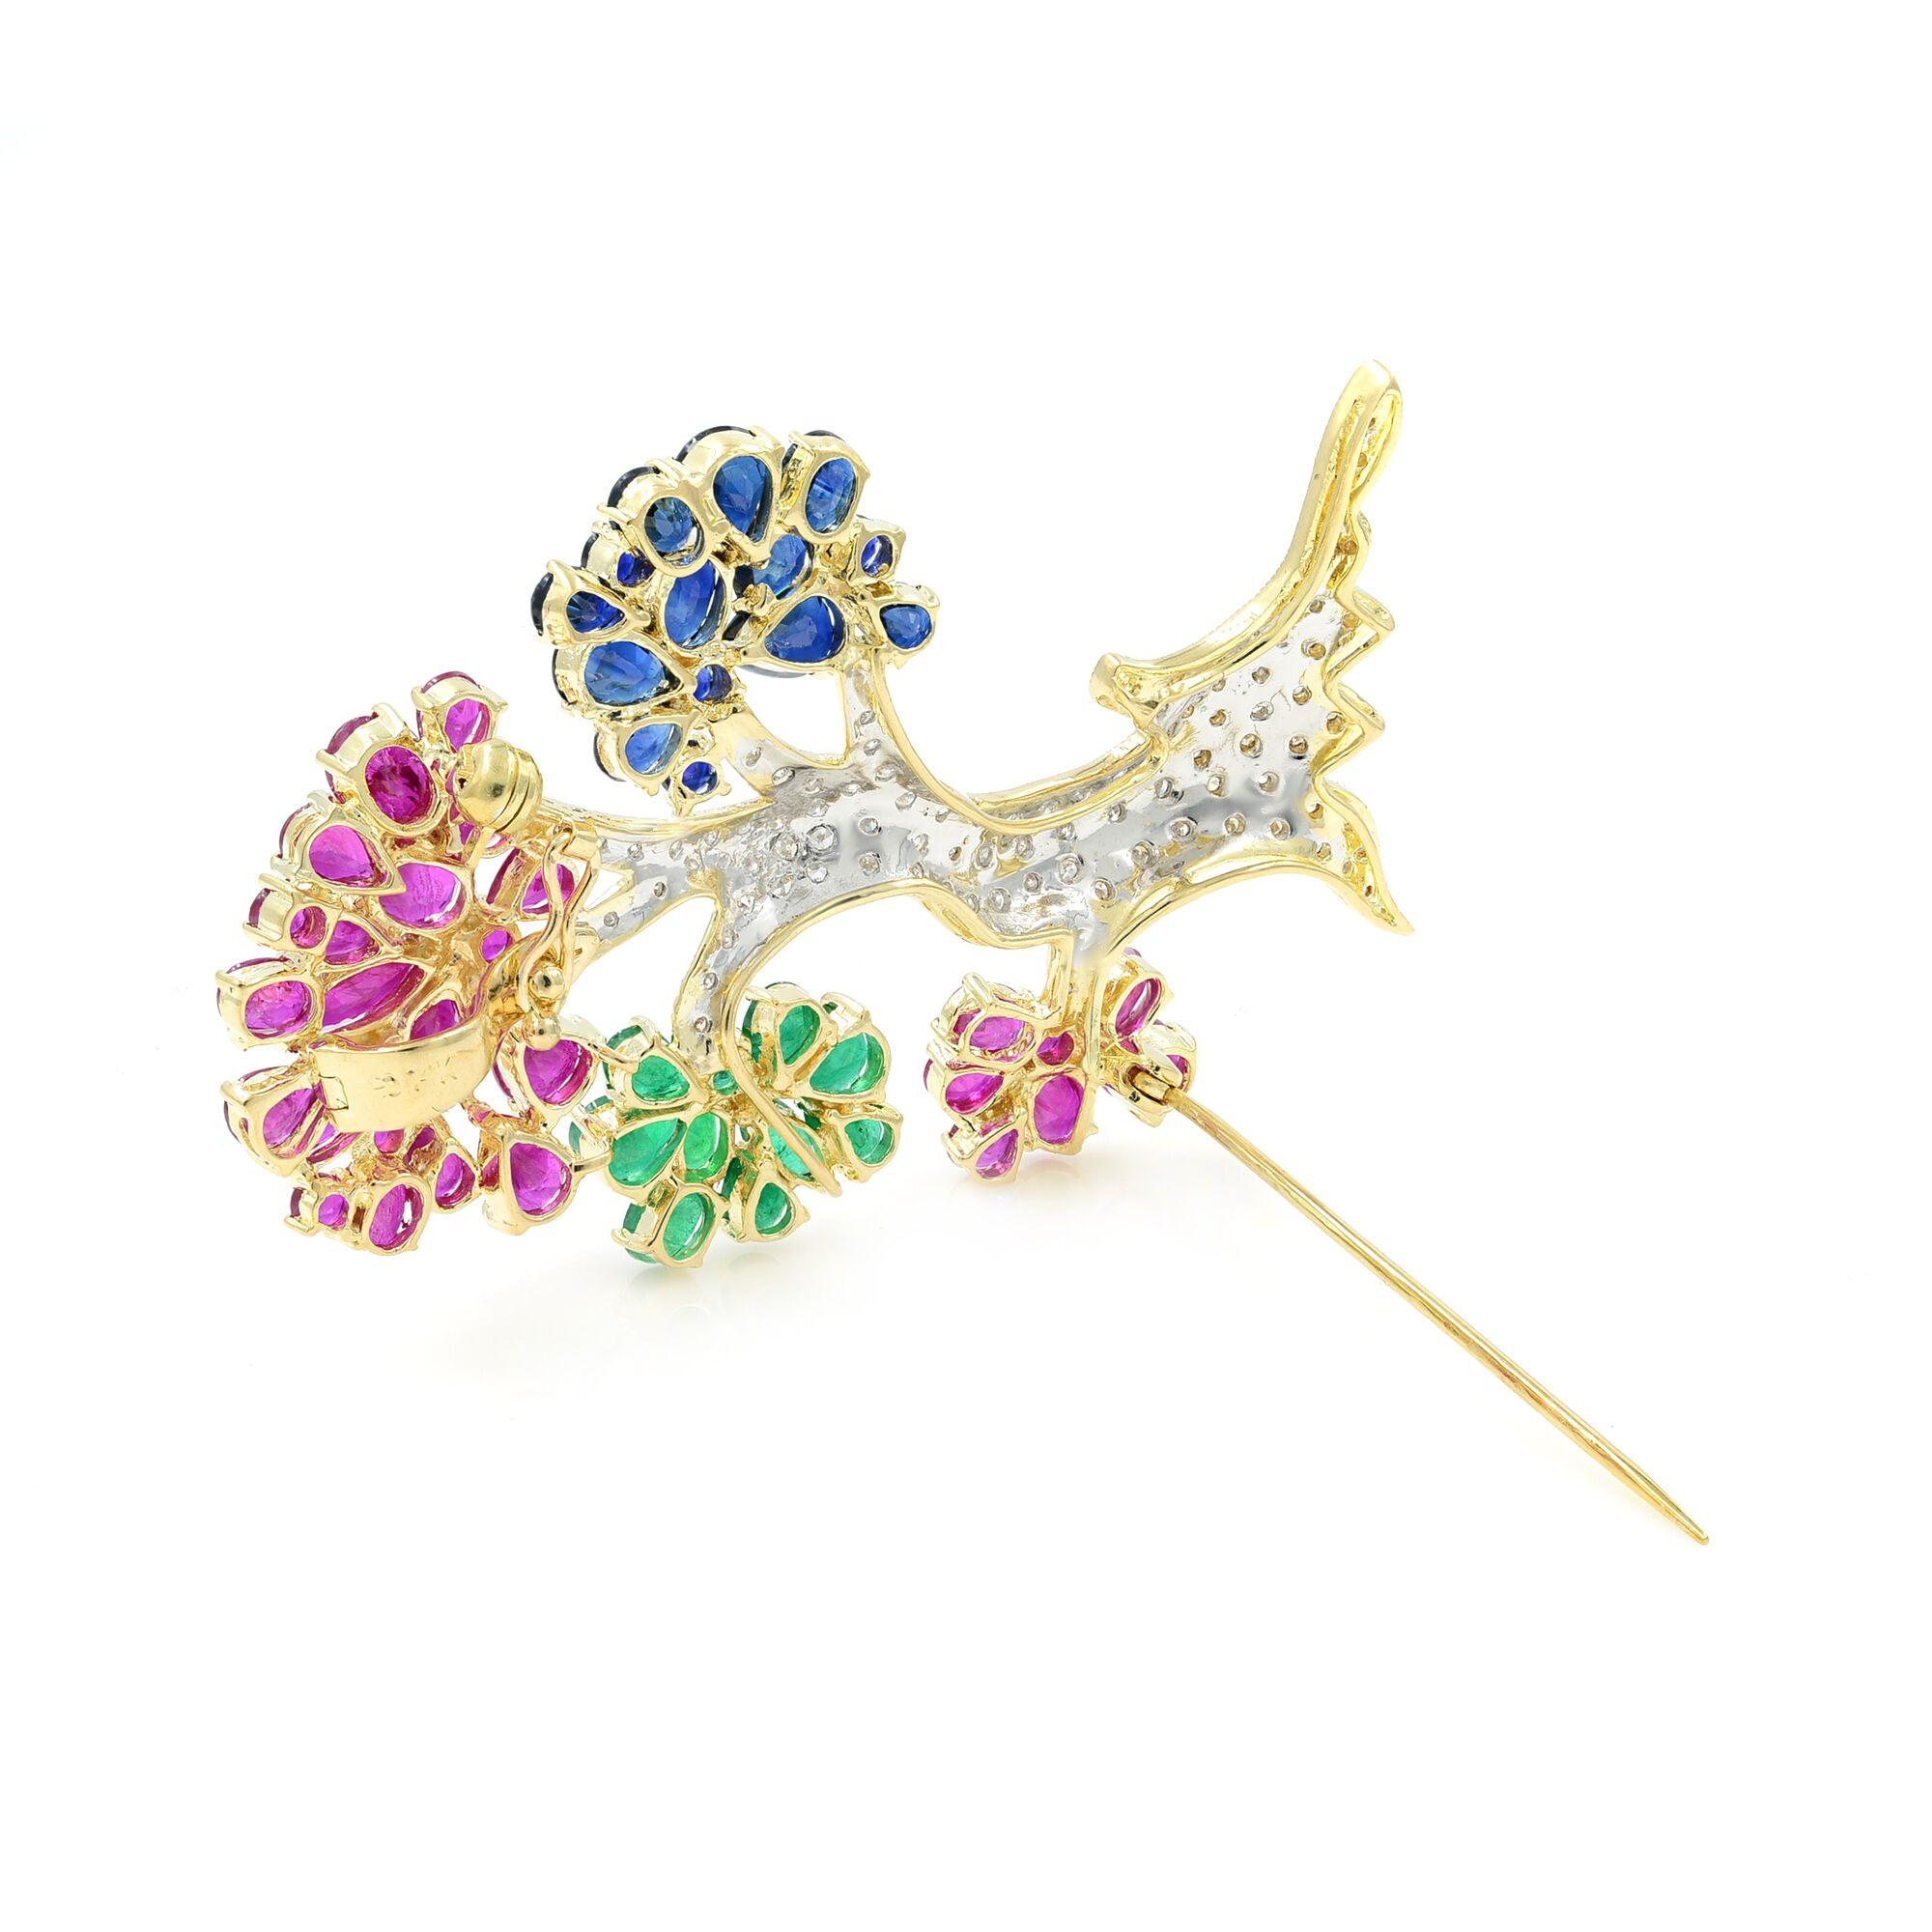 14K Yellow Gold Ruby 12.4cttw Diamond 0.60cttw Emerald Sapphire Tree Brooch In Excellent Condition For Sale In New York, NY